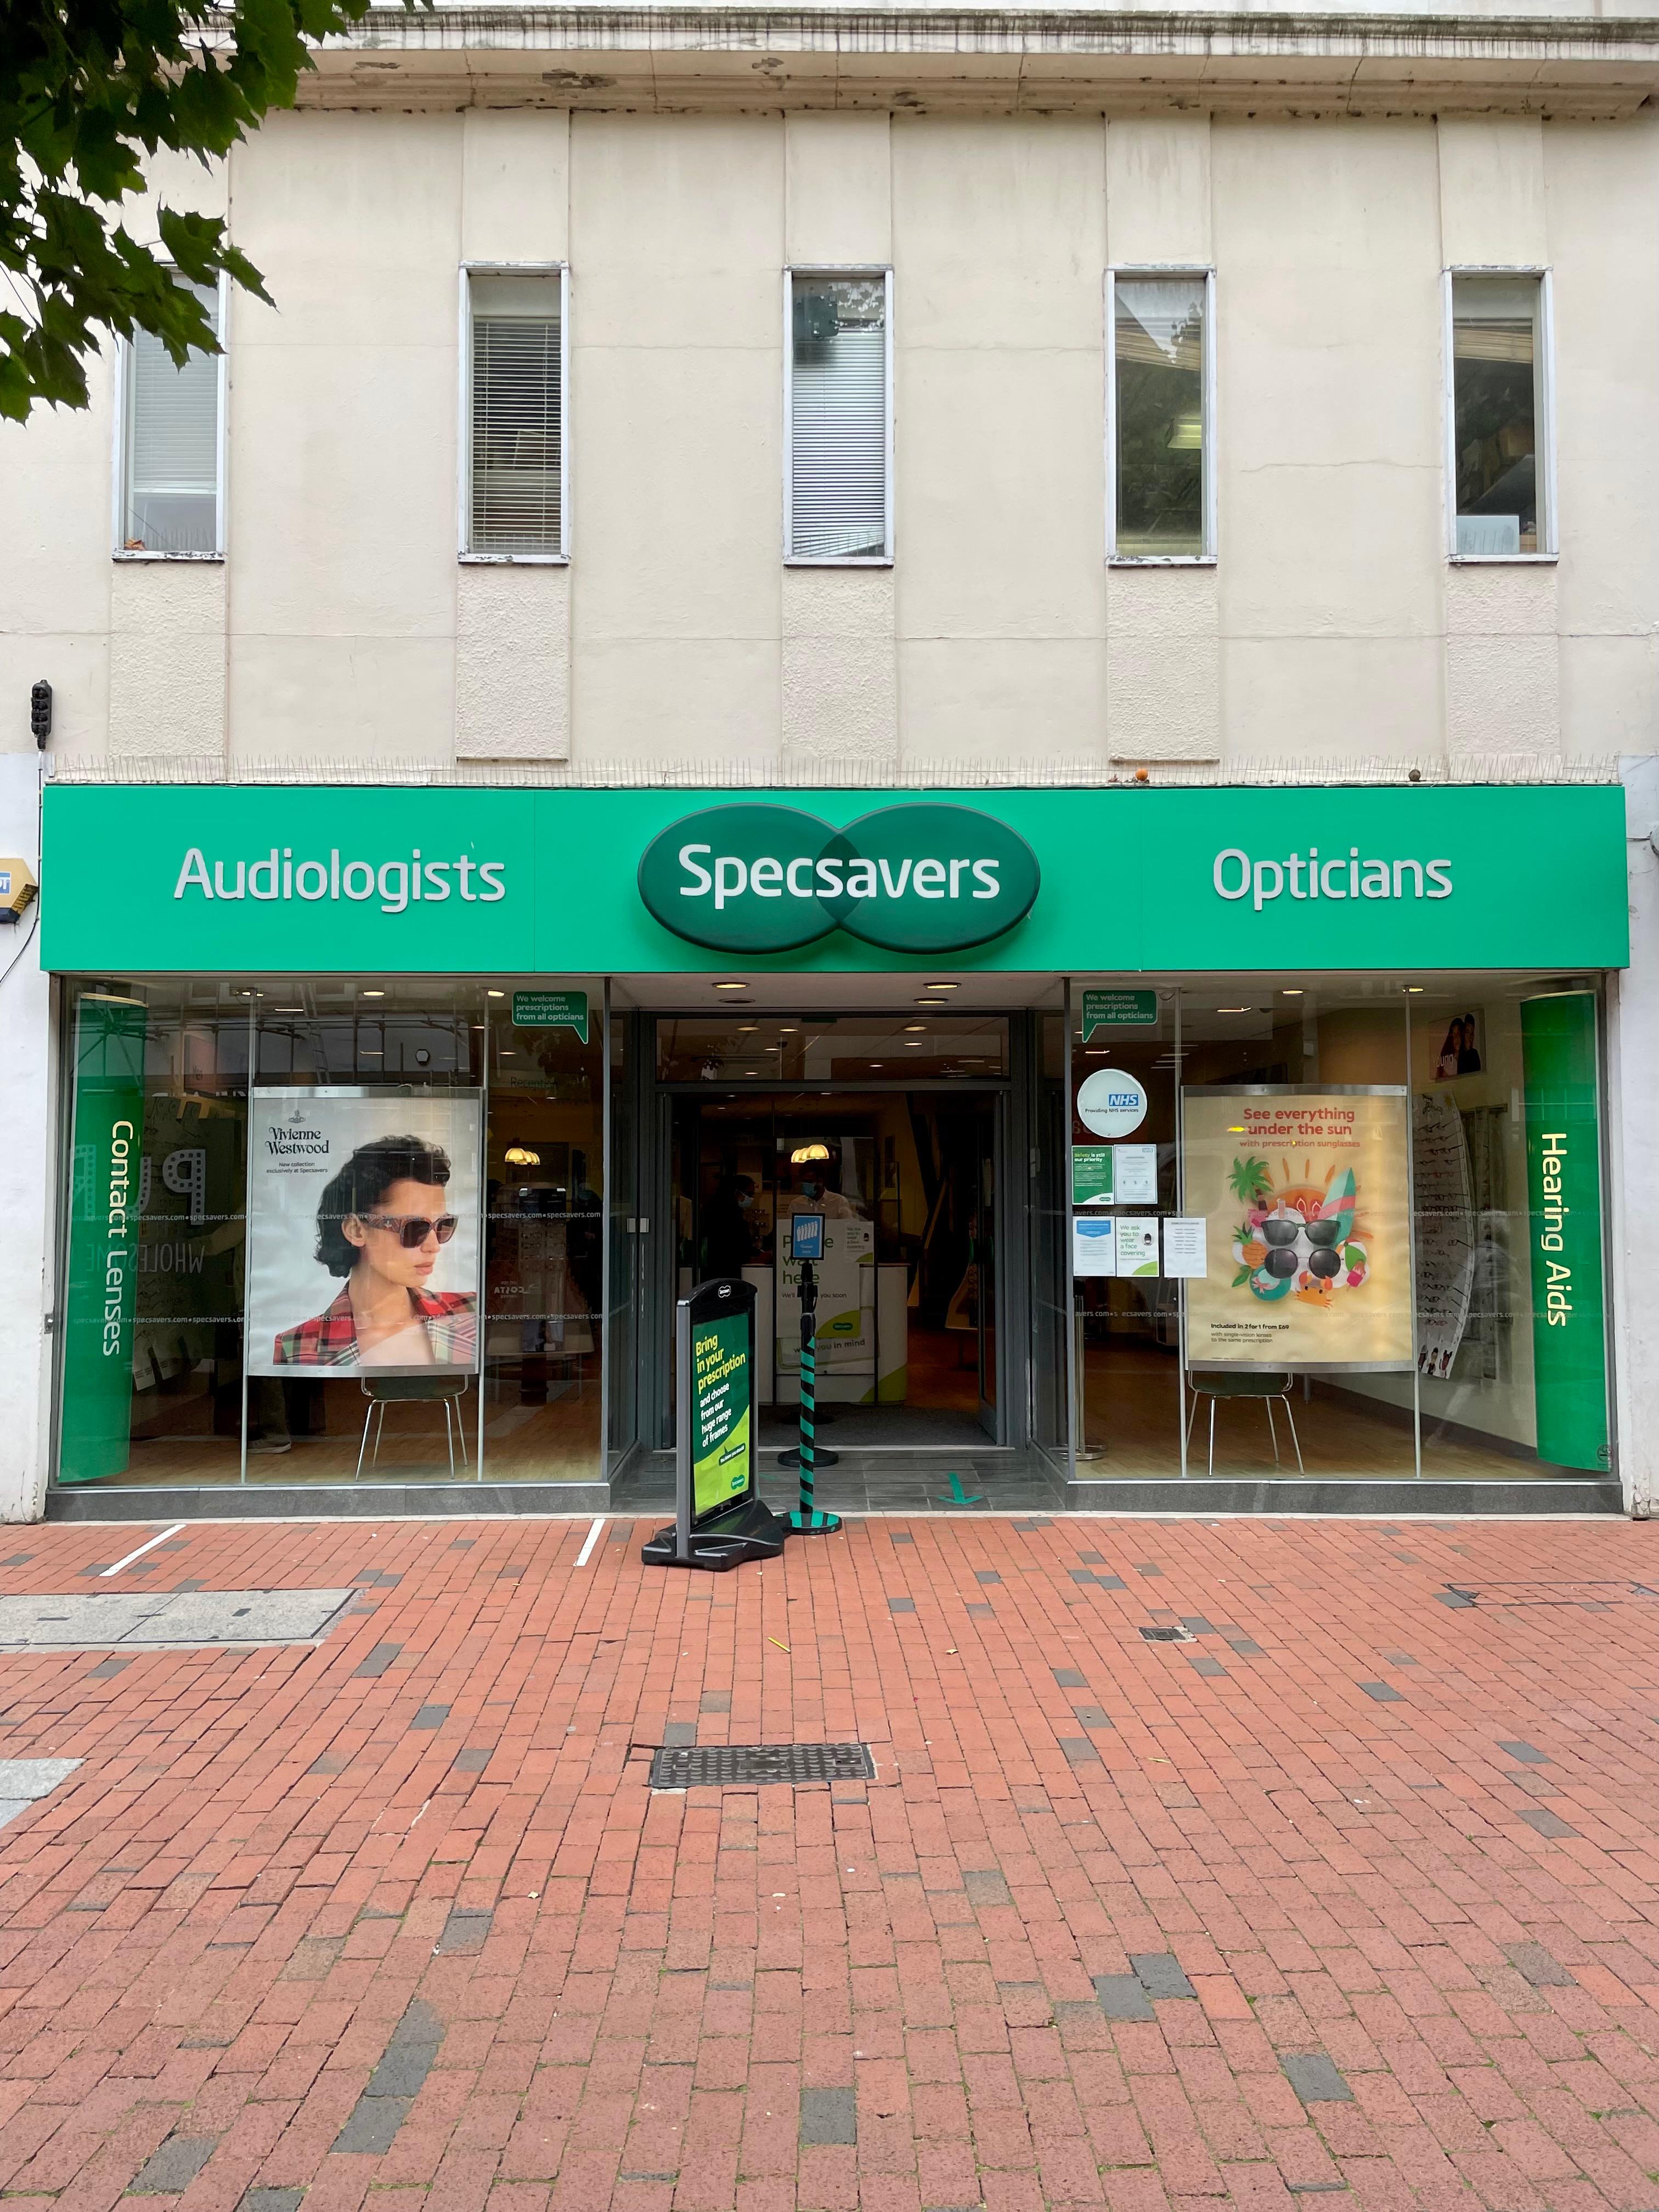 Images Specsavers Opticians and Audiologists - Reading